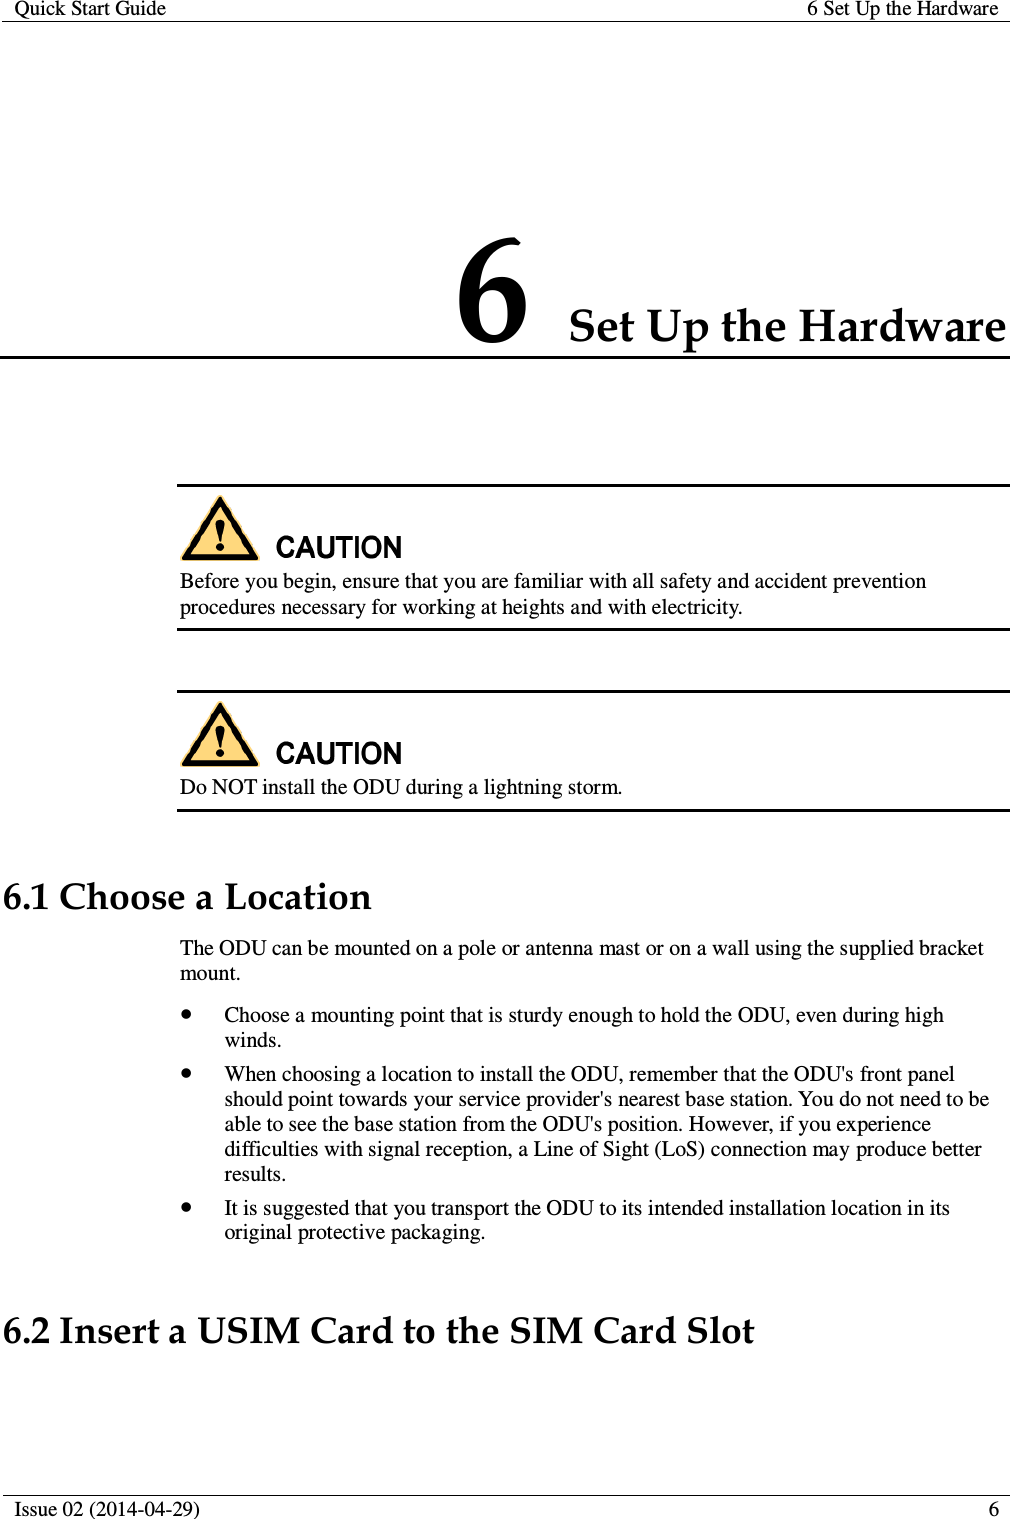 Quick Start Guide 6 Set Up the Hardware  Issue 02 (2014-04-29)  6  6 Set Up the Hardware   Before you begin, ensure that you are familiar with all safety and accident prevention procedures necessary for working at heights and with electricity.   Do NOT install the ODU during a lightning storm. 6.1 Choose a Location The ODU can be mounted on a pole or antenna mast or on a wall using the supplied bracket mount.  Choose a mounting point that is sturdy enough to hold the ODU, even during high winds.  When choosing a location to install the ODU, remember that the ODU&apos;s front panel should point towards your service provider&apos;s nearest base station. You do not need to be able to see the base station from the ODU&apos;s position. However, if you experience difficulties with signal reception, a Line of Sight (LoS) connection may produce better results.  It is suggested that you transport the ODU to its intended installation location in its original protective packaging. 6.2 Insert a USIM Card to the SIM Card Slot  